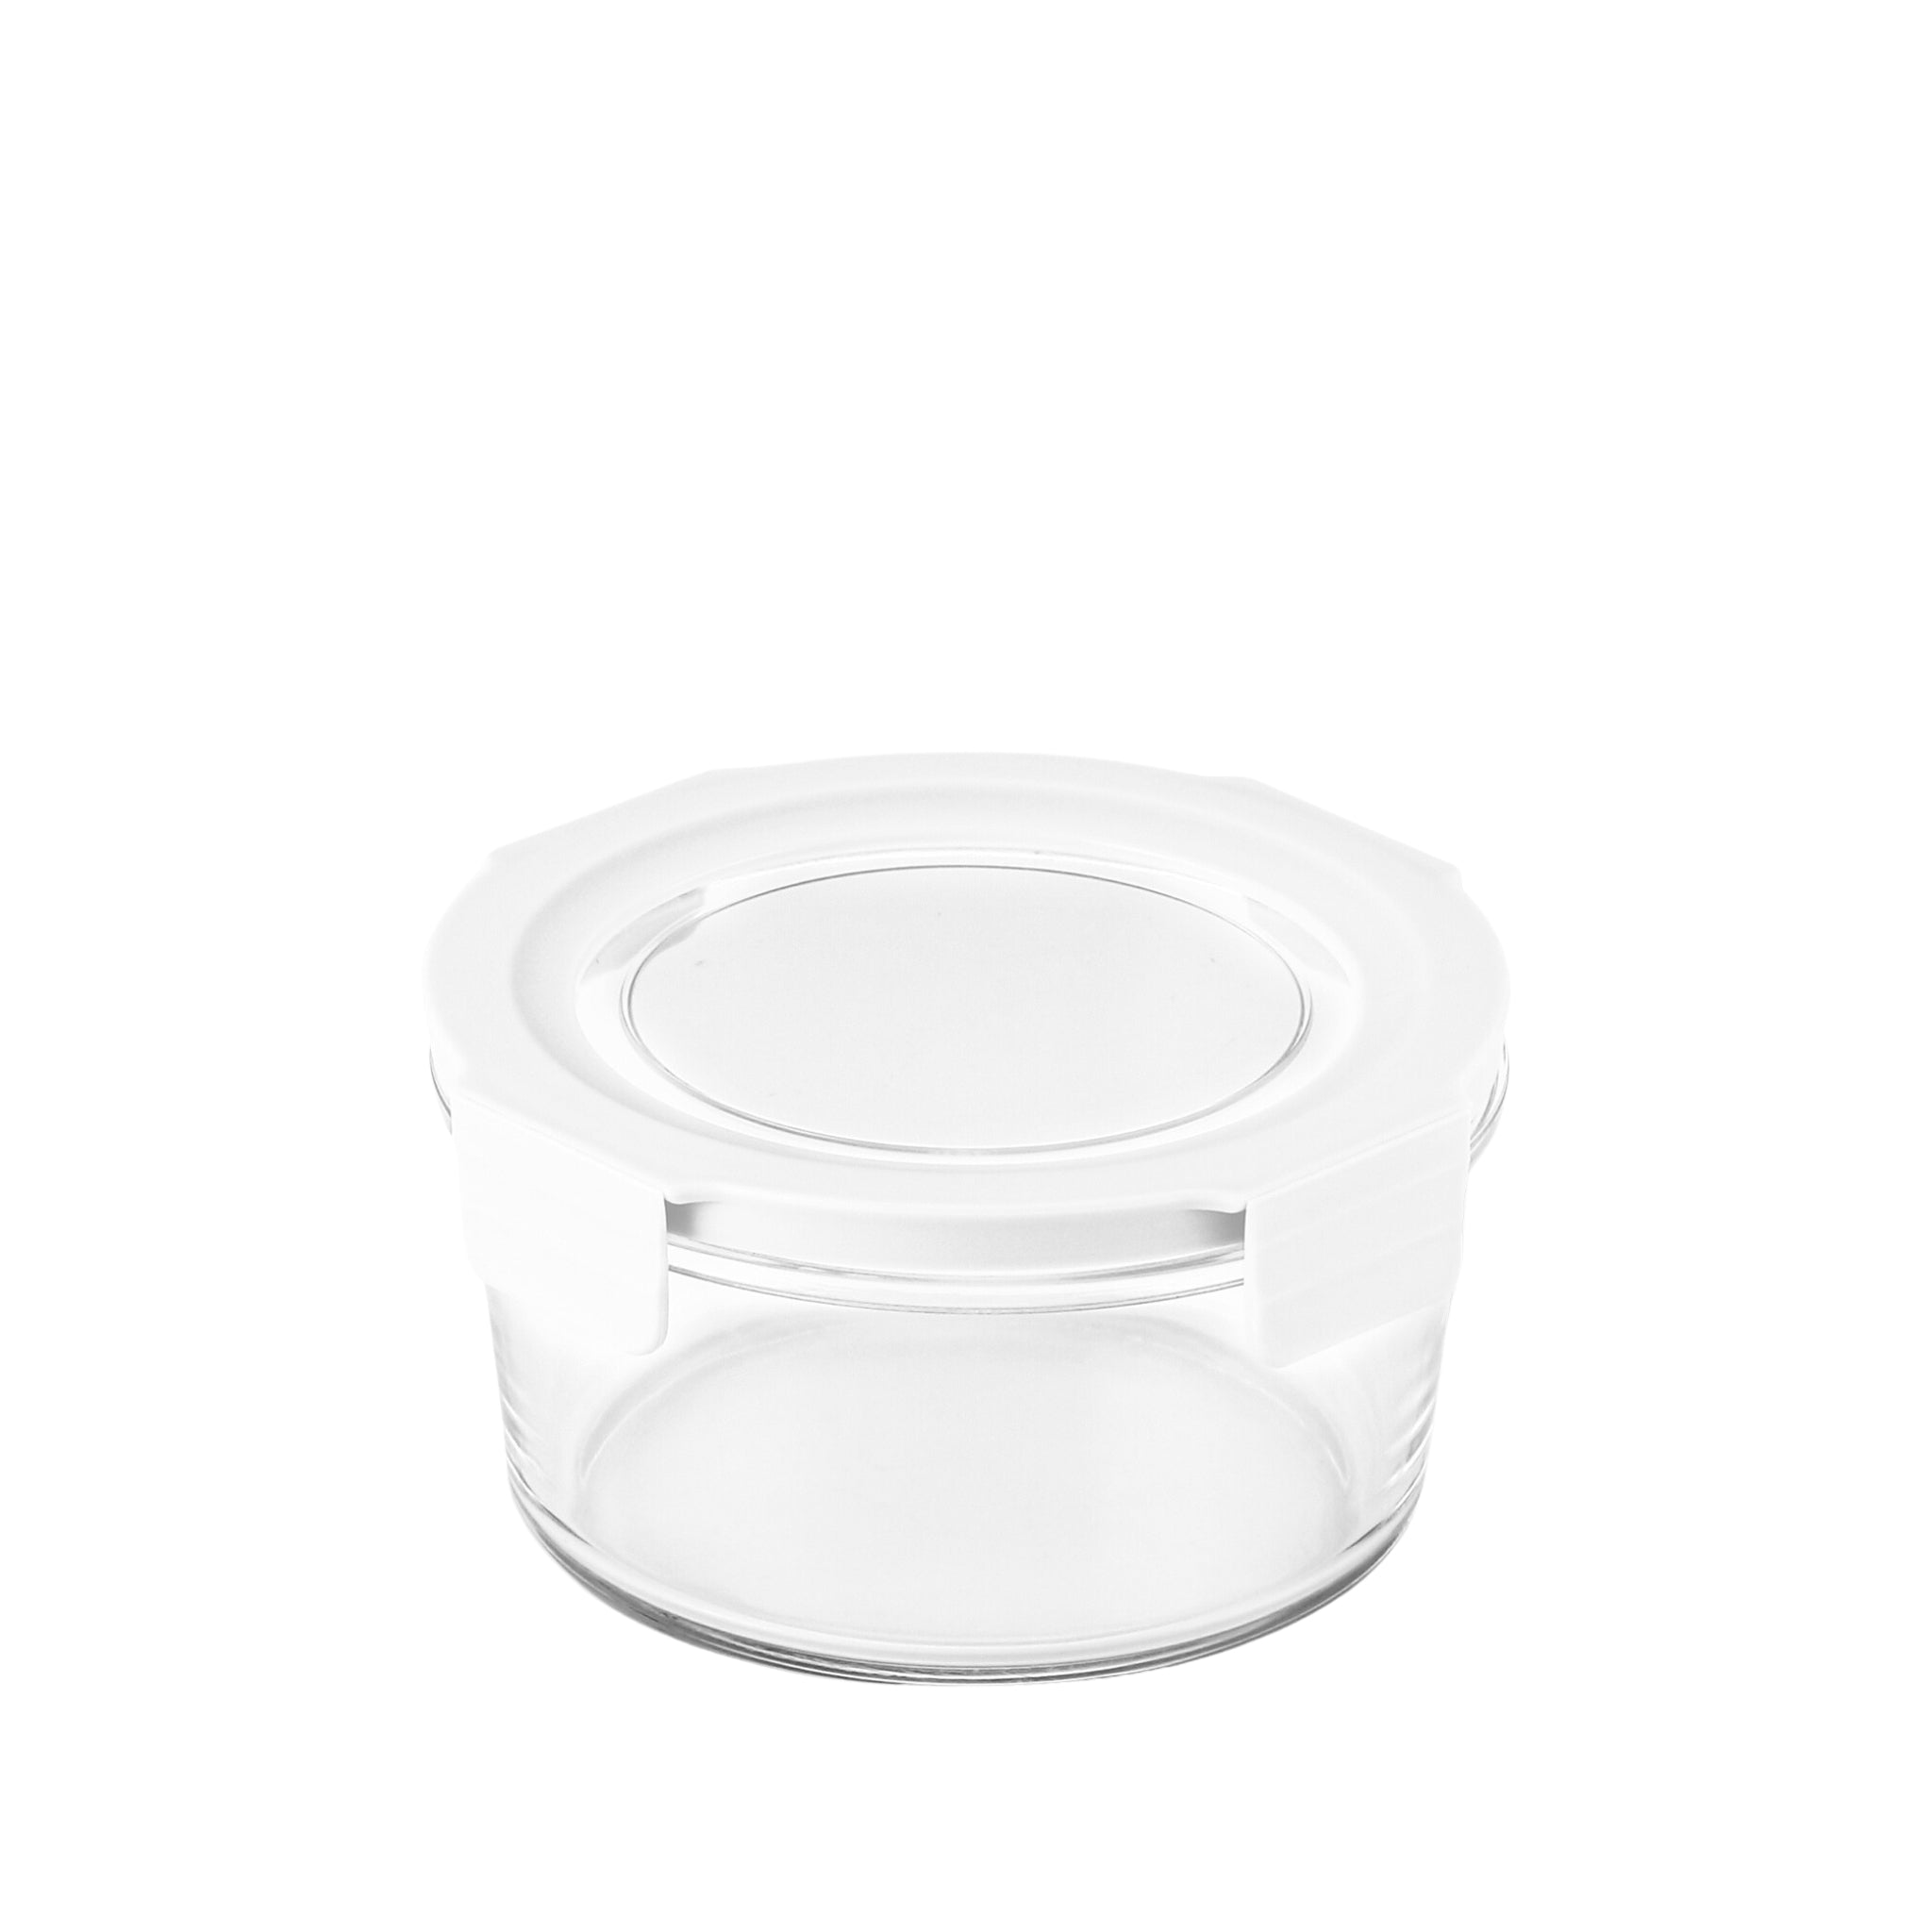 Small | Soup GlassStorage | Food Containers For NOTIQ Lunch Bags | NOTIQ